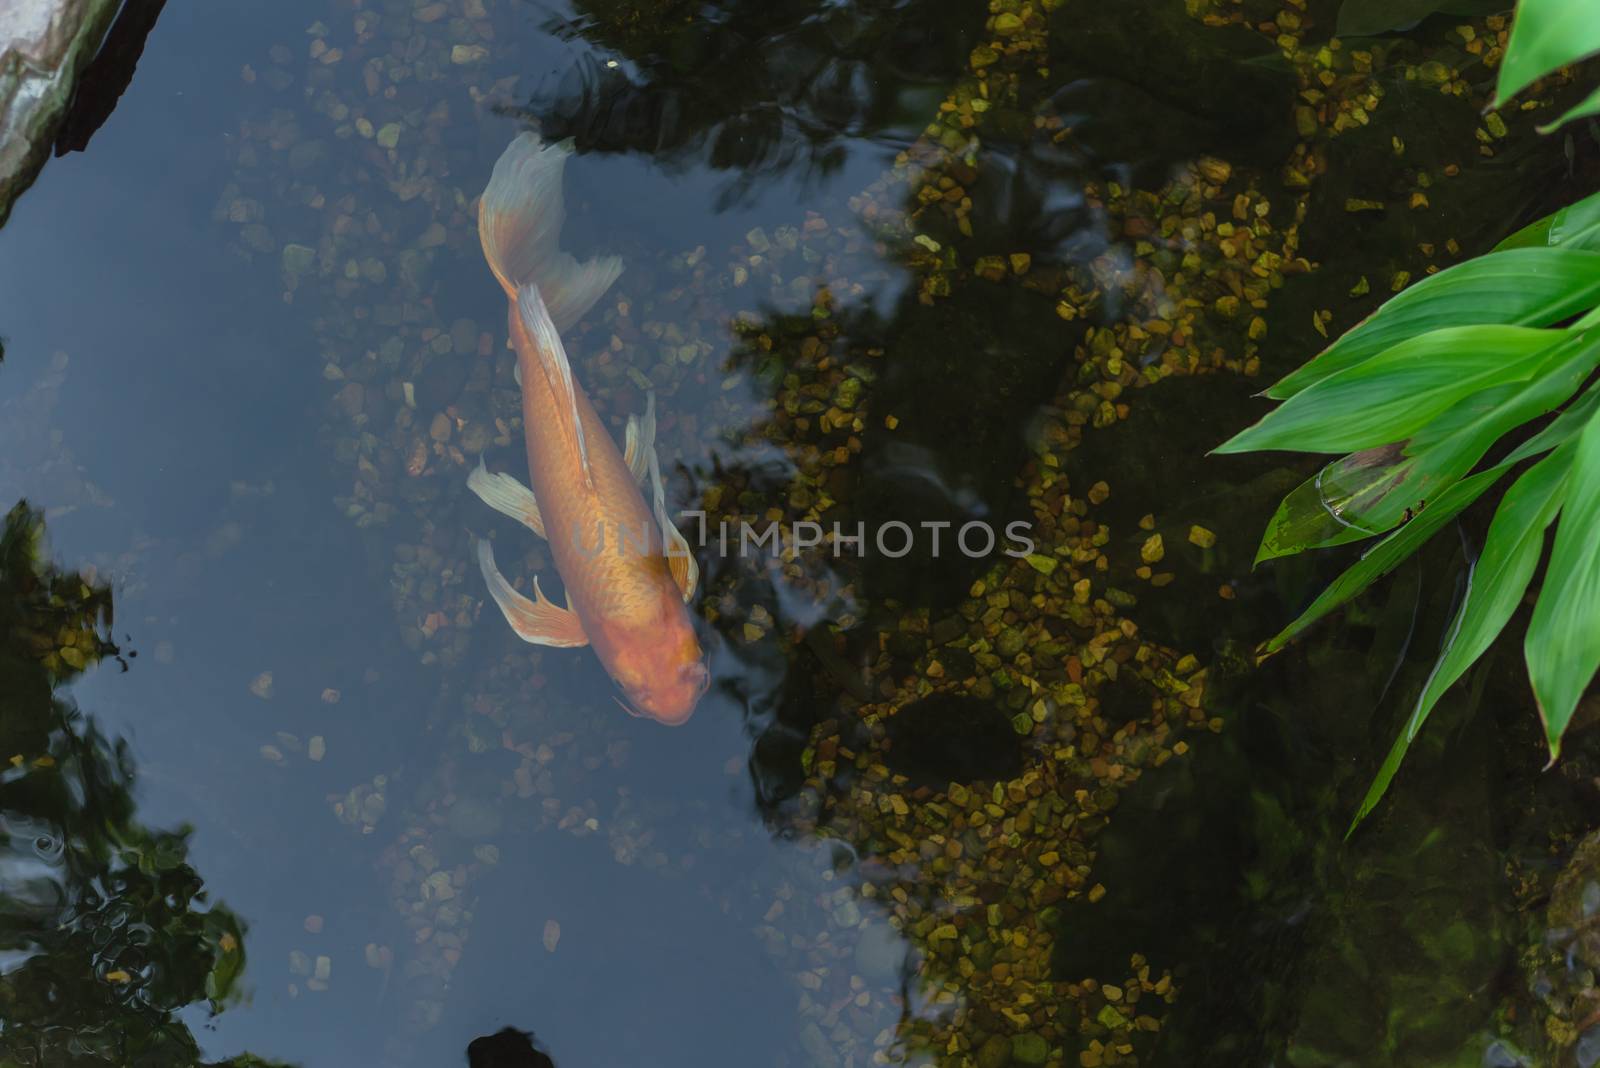 One koi fish swimming in landscaping pond or water garden near Dallas, Texas, America